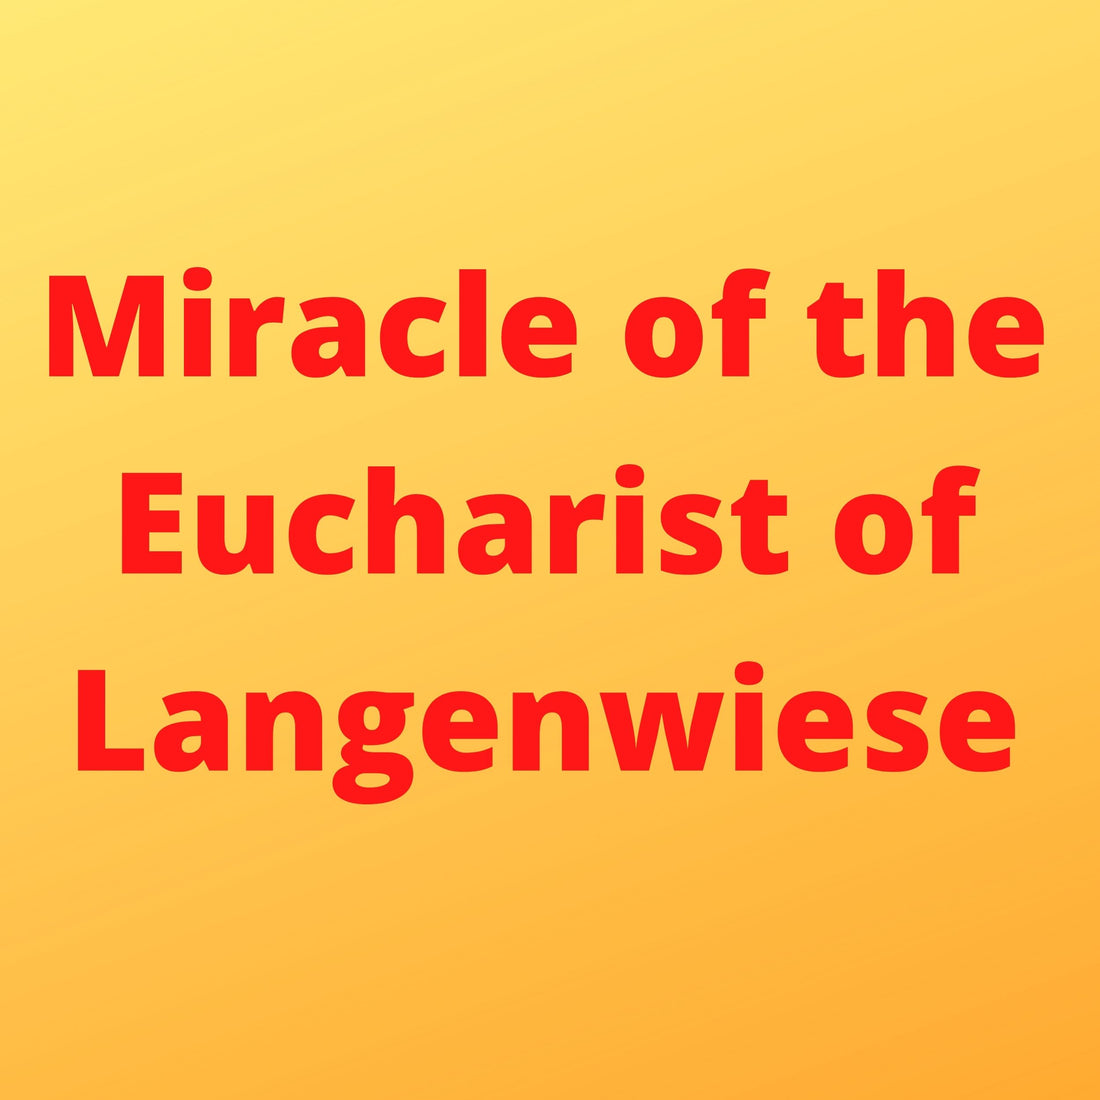 Miracle of the Eucharist of Langenwiese